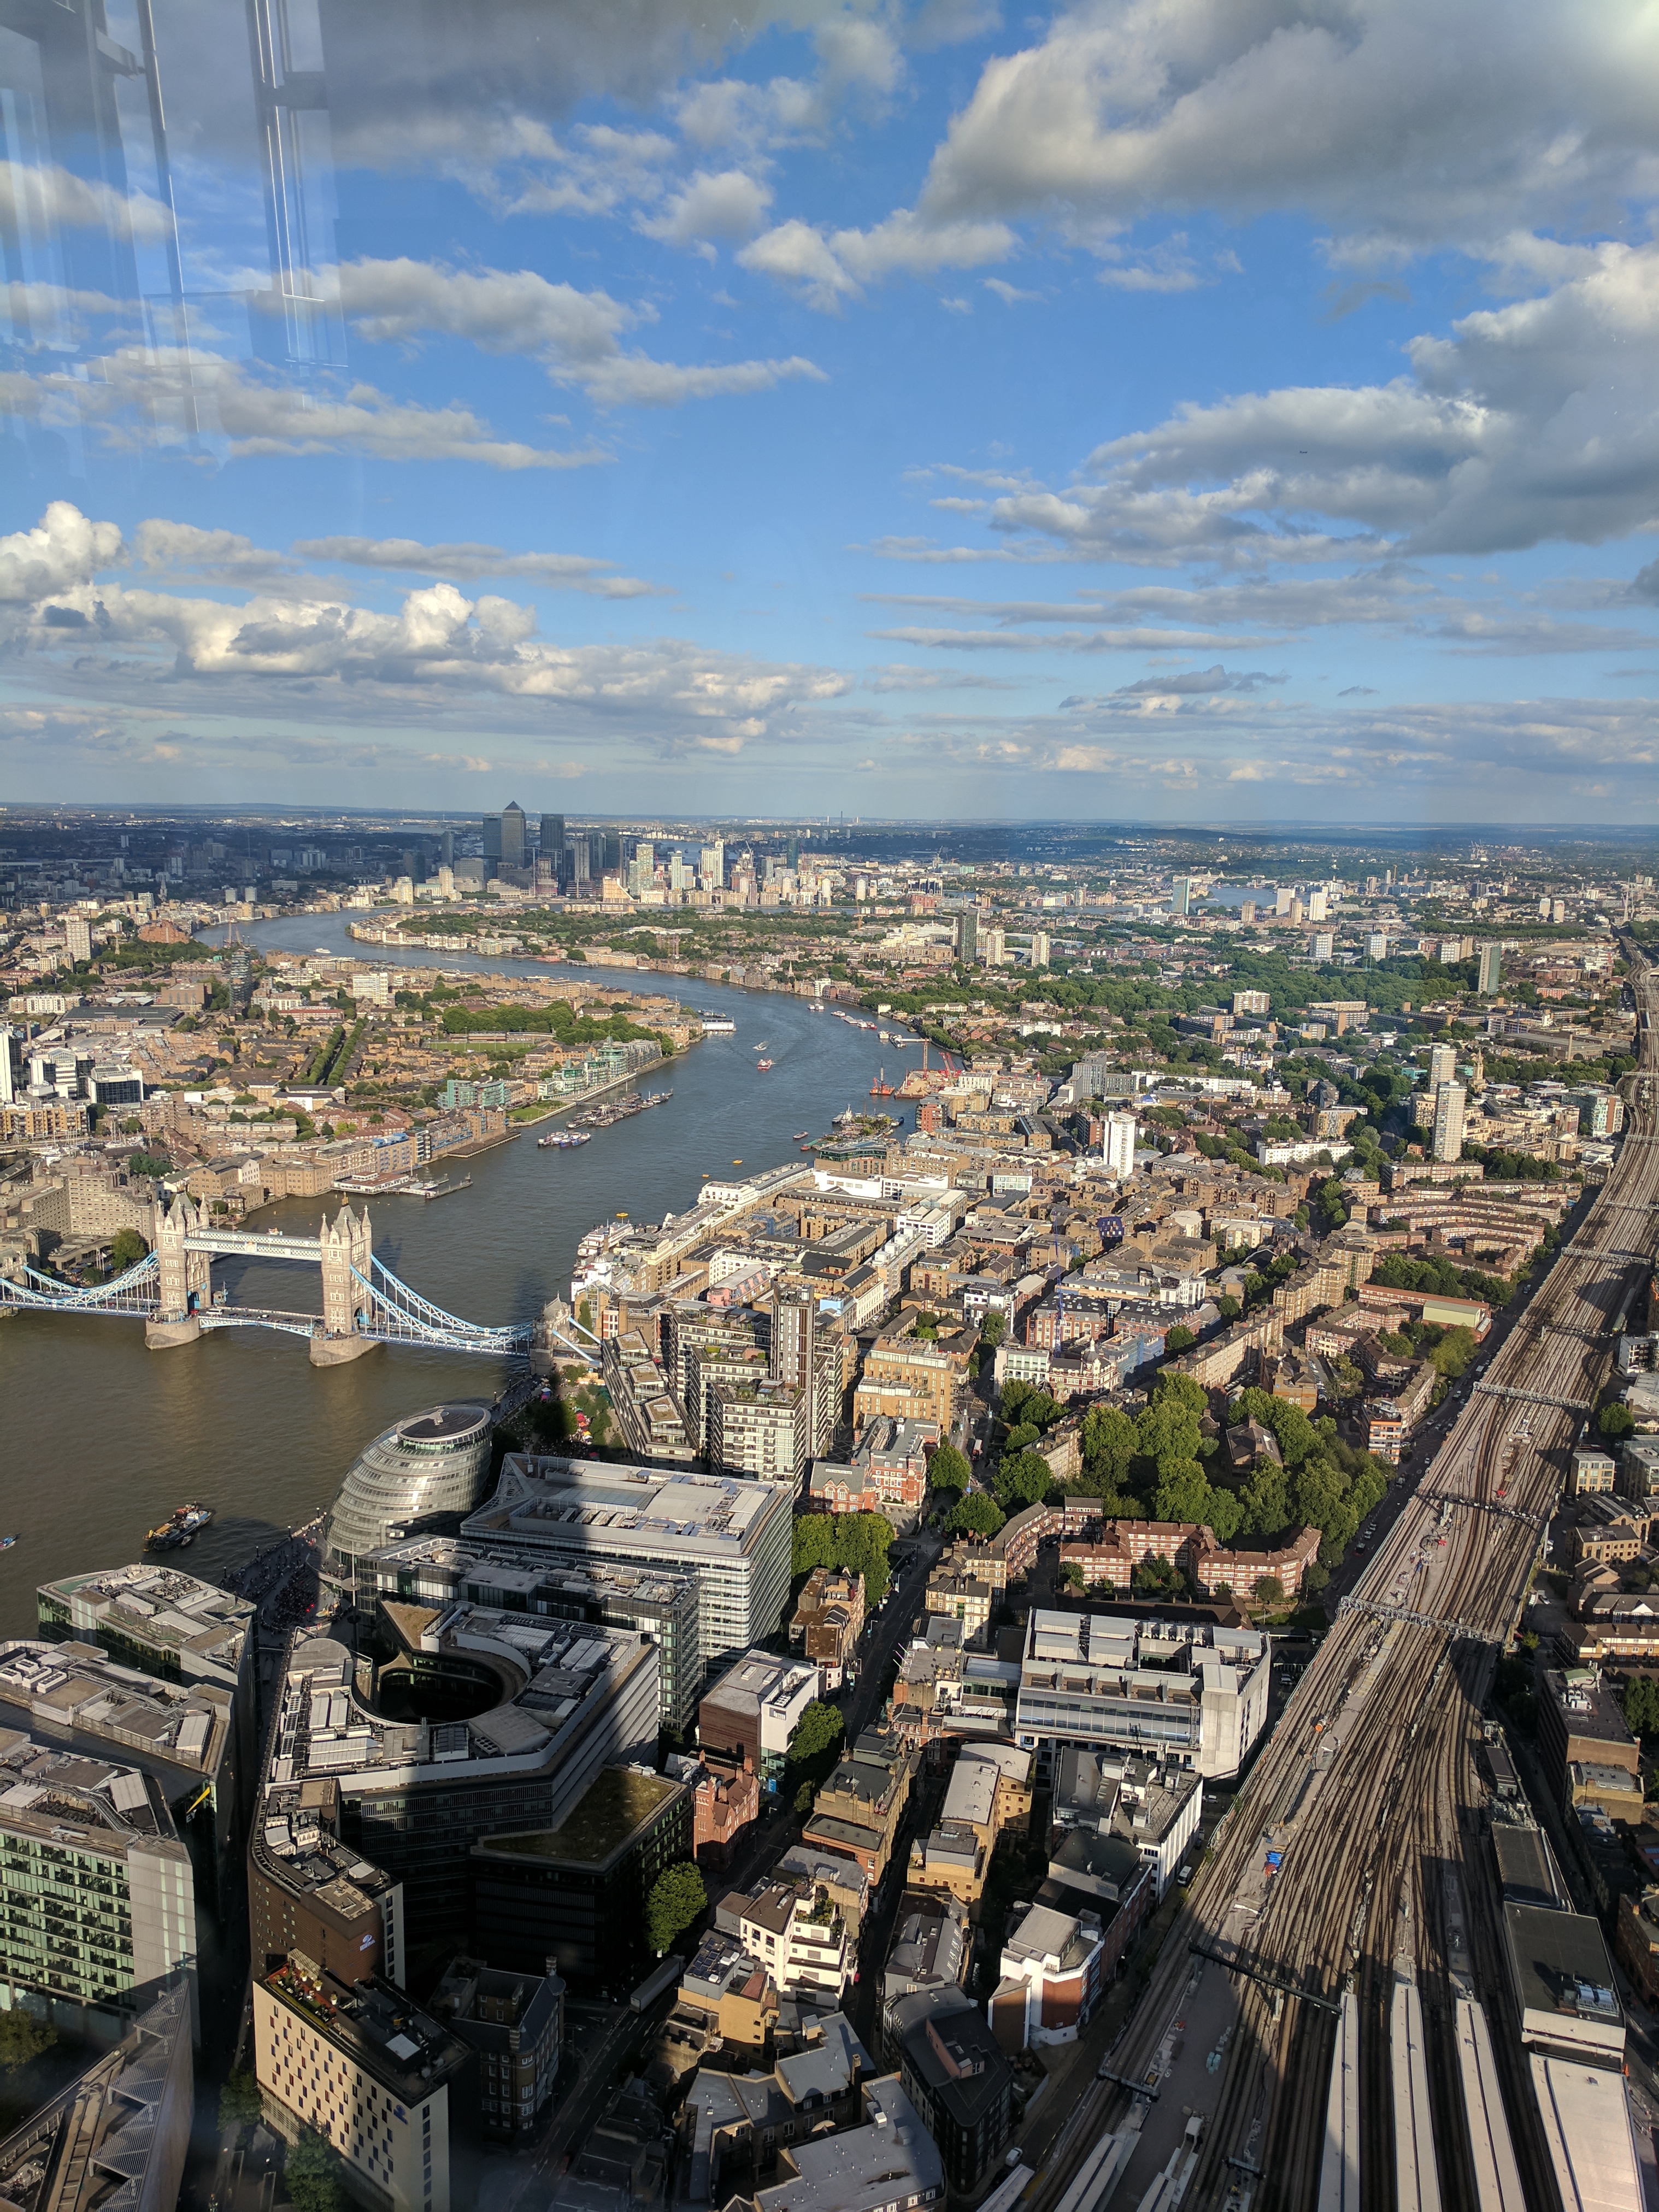 The view from the Shard